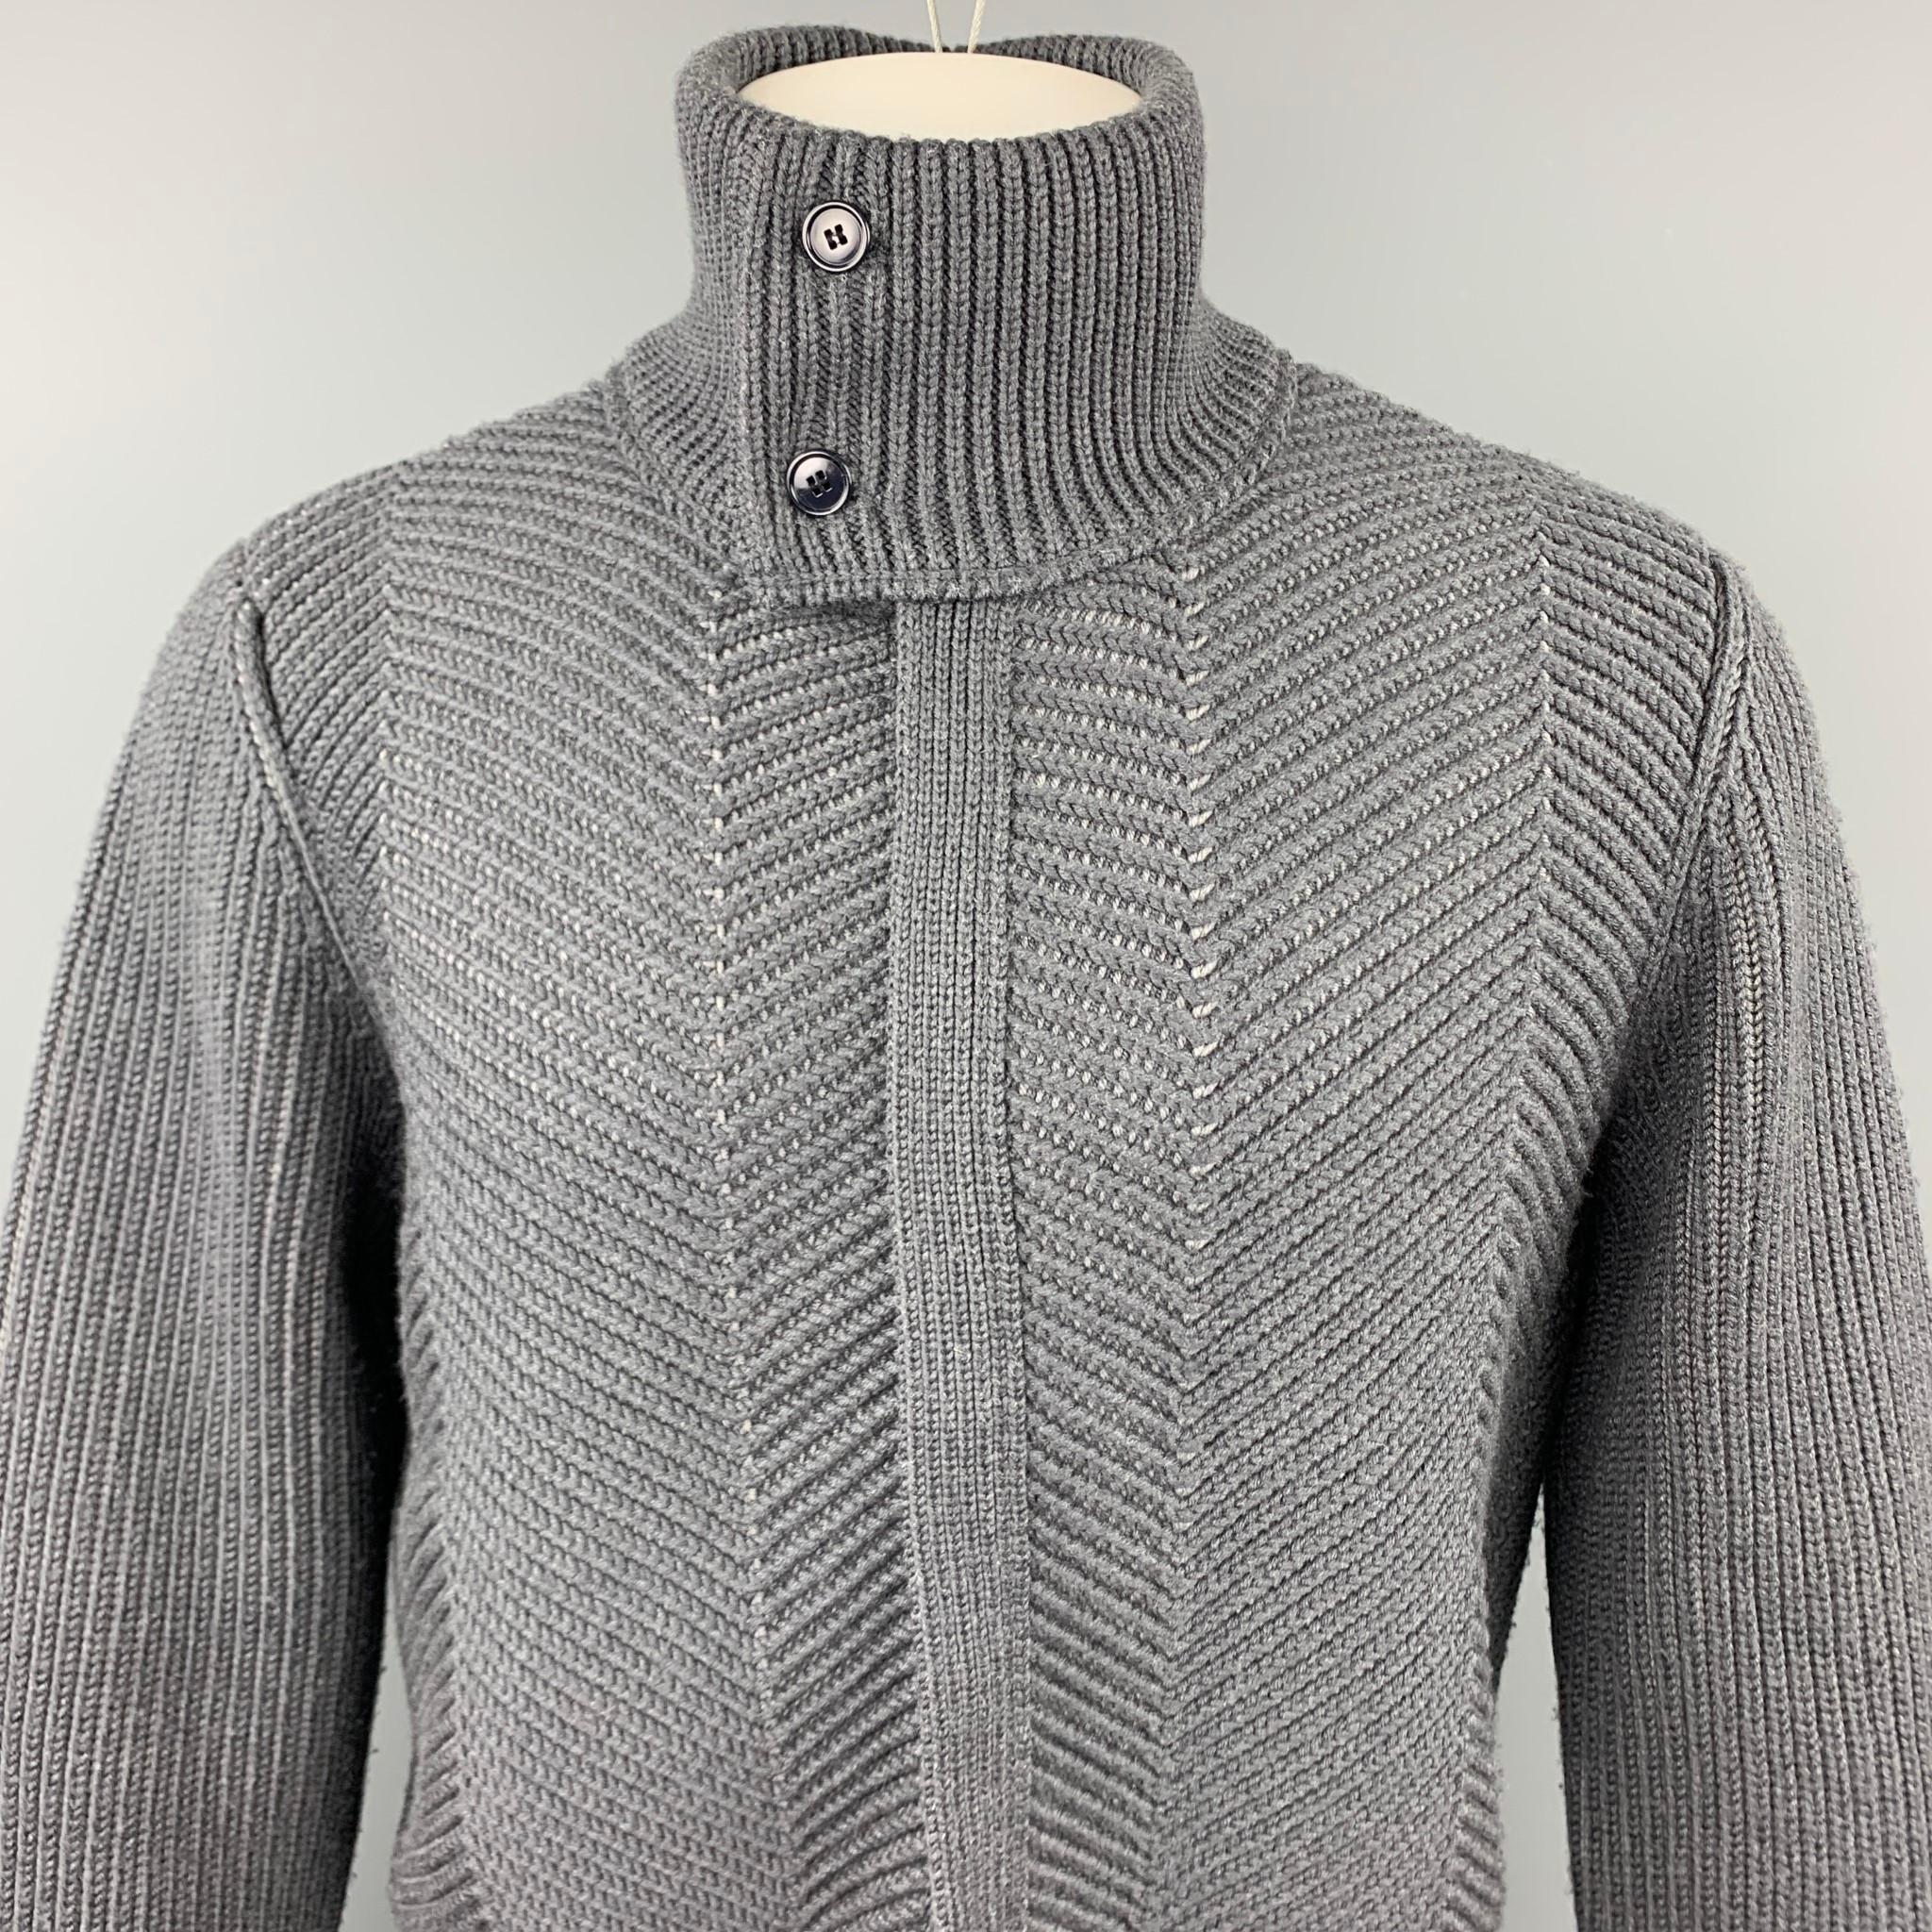 LOUIS VUITTON jacket comes in a gray knitted wool blend featuring a buttoned high collar and a hidden zip up closure. Made in Italy.

Excellent Pre-Owned Condition.
Marked: M
Original Retail Price: $2,500.00

Measurements:

Shoulder: 18 in. 
Chest: